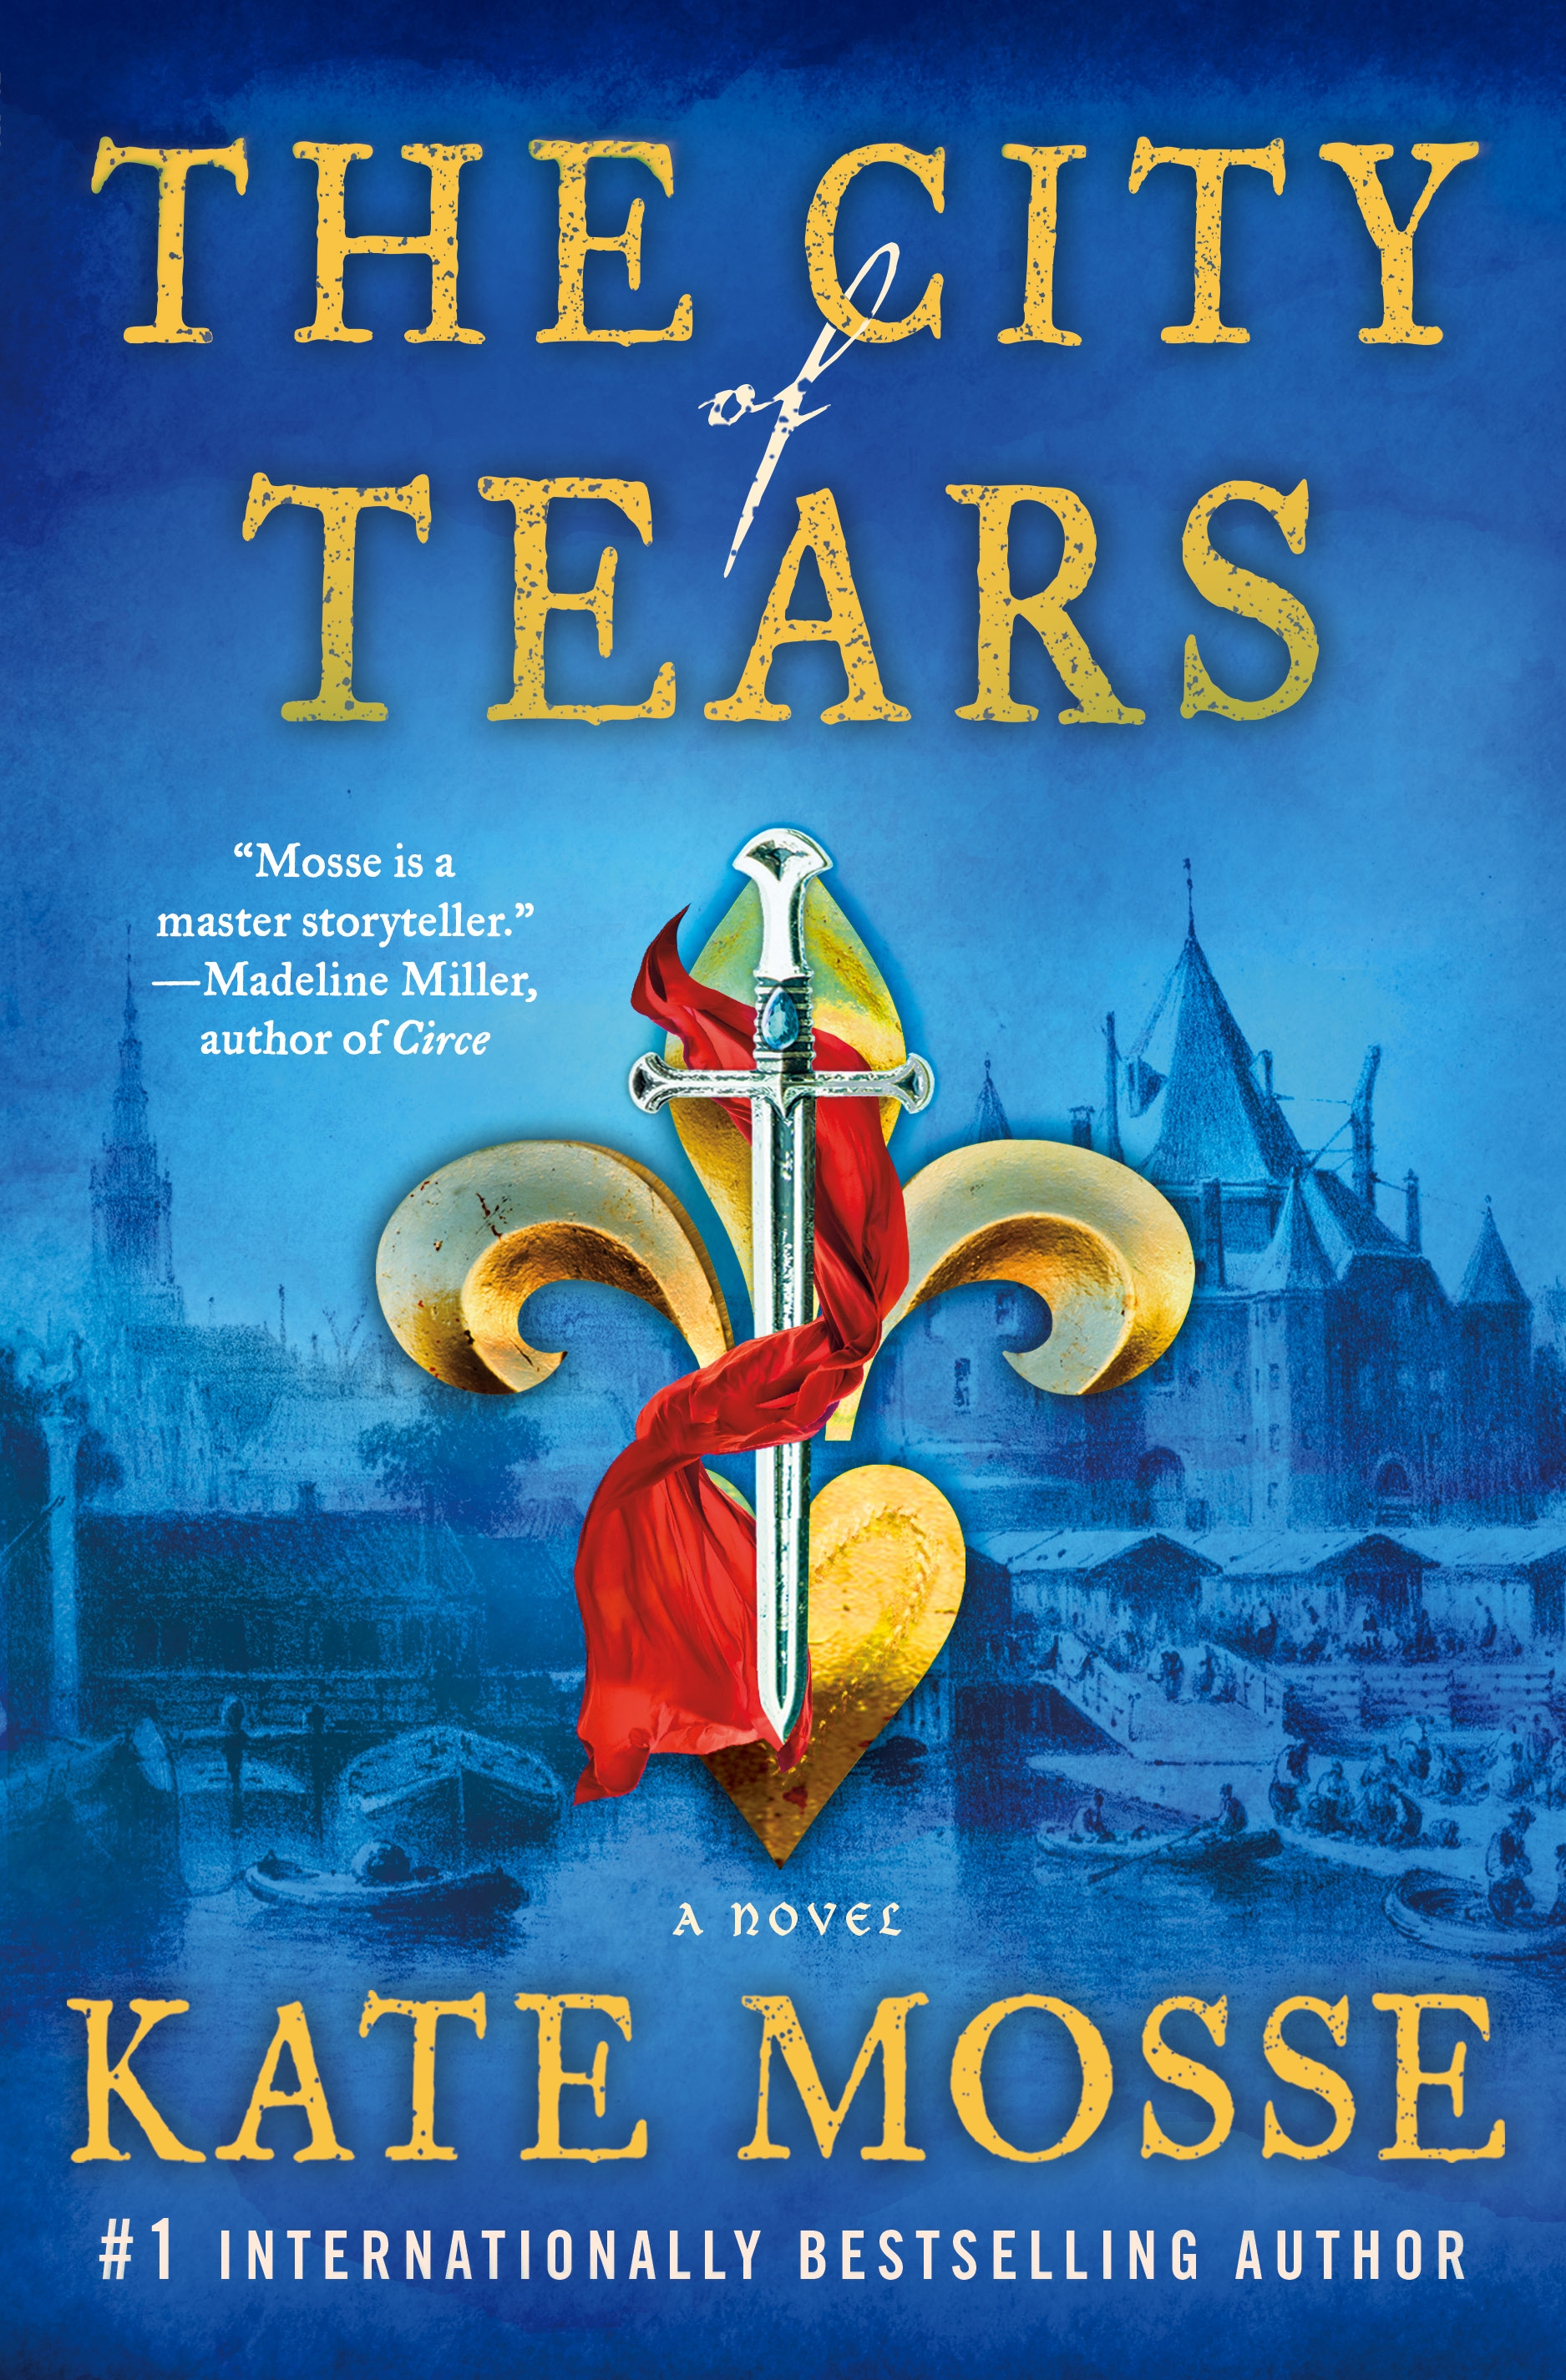 Book “The City of Tears” by Kate Mosse — January 19, 2021